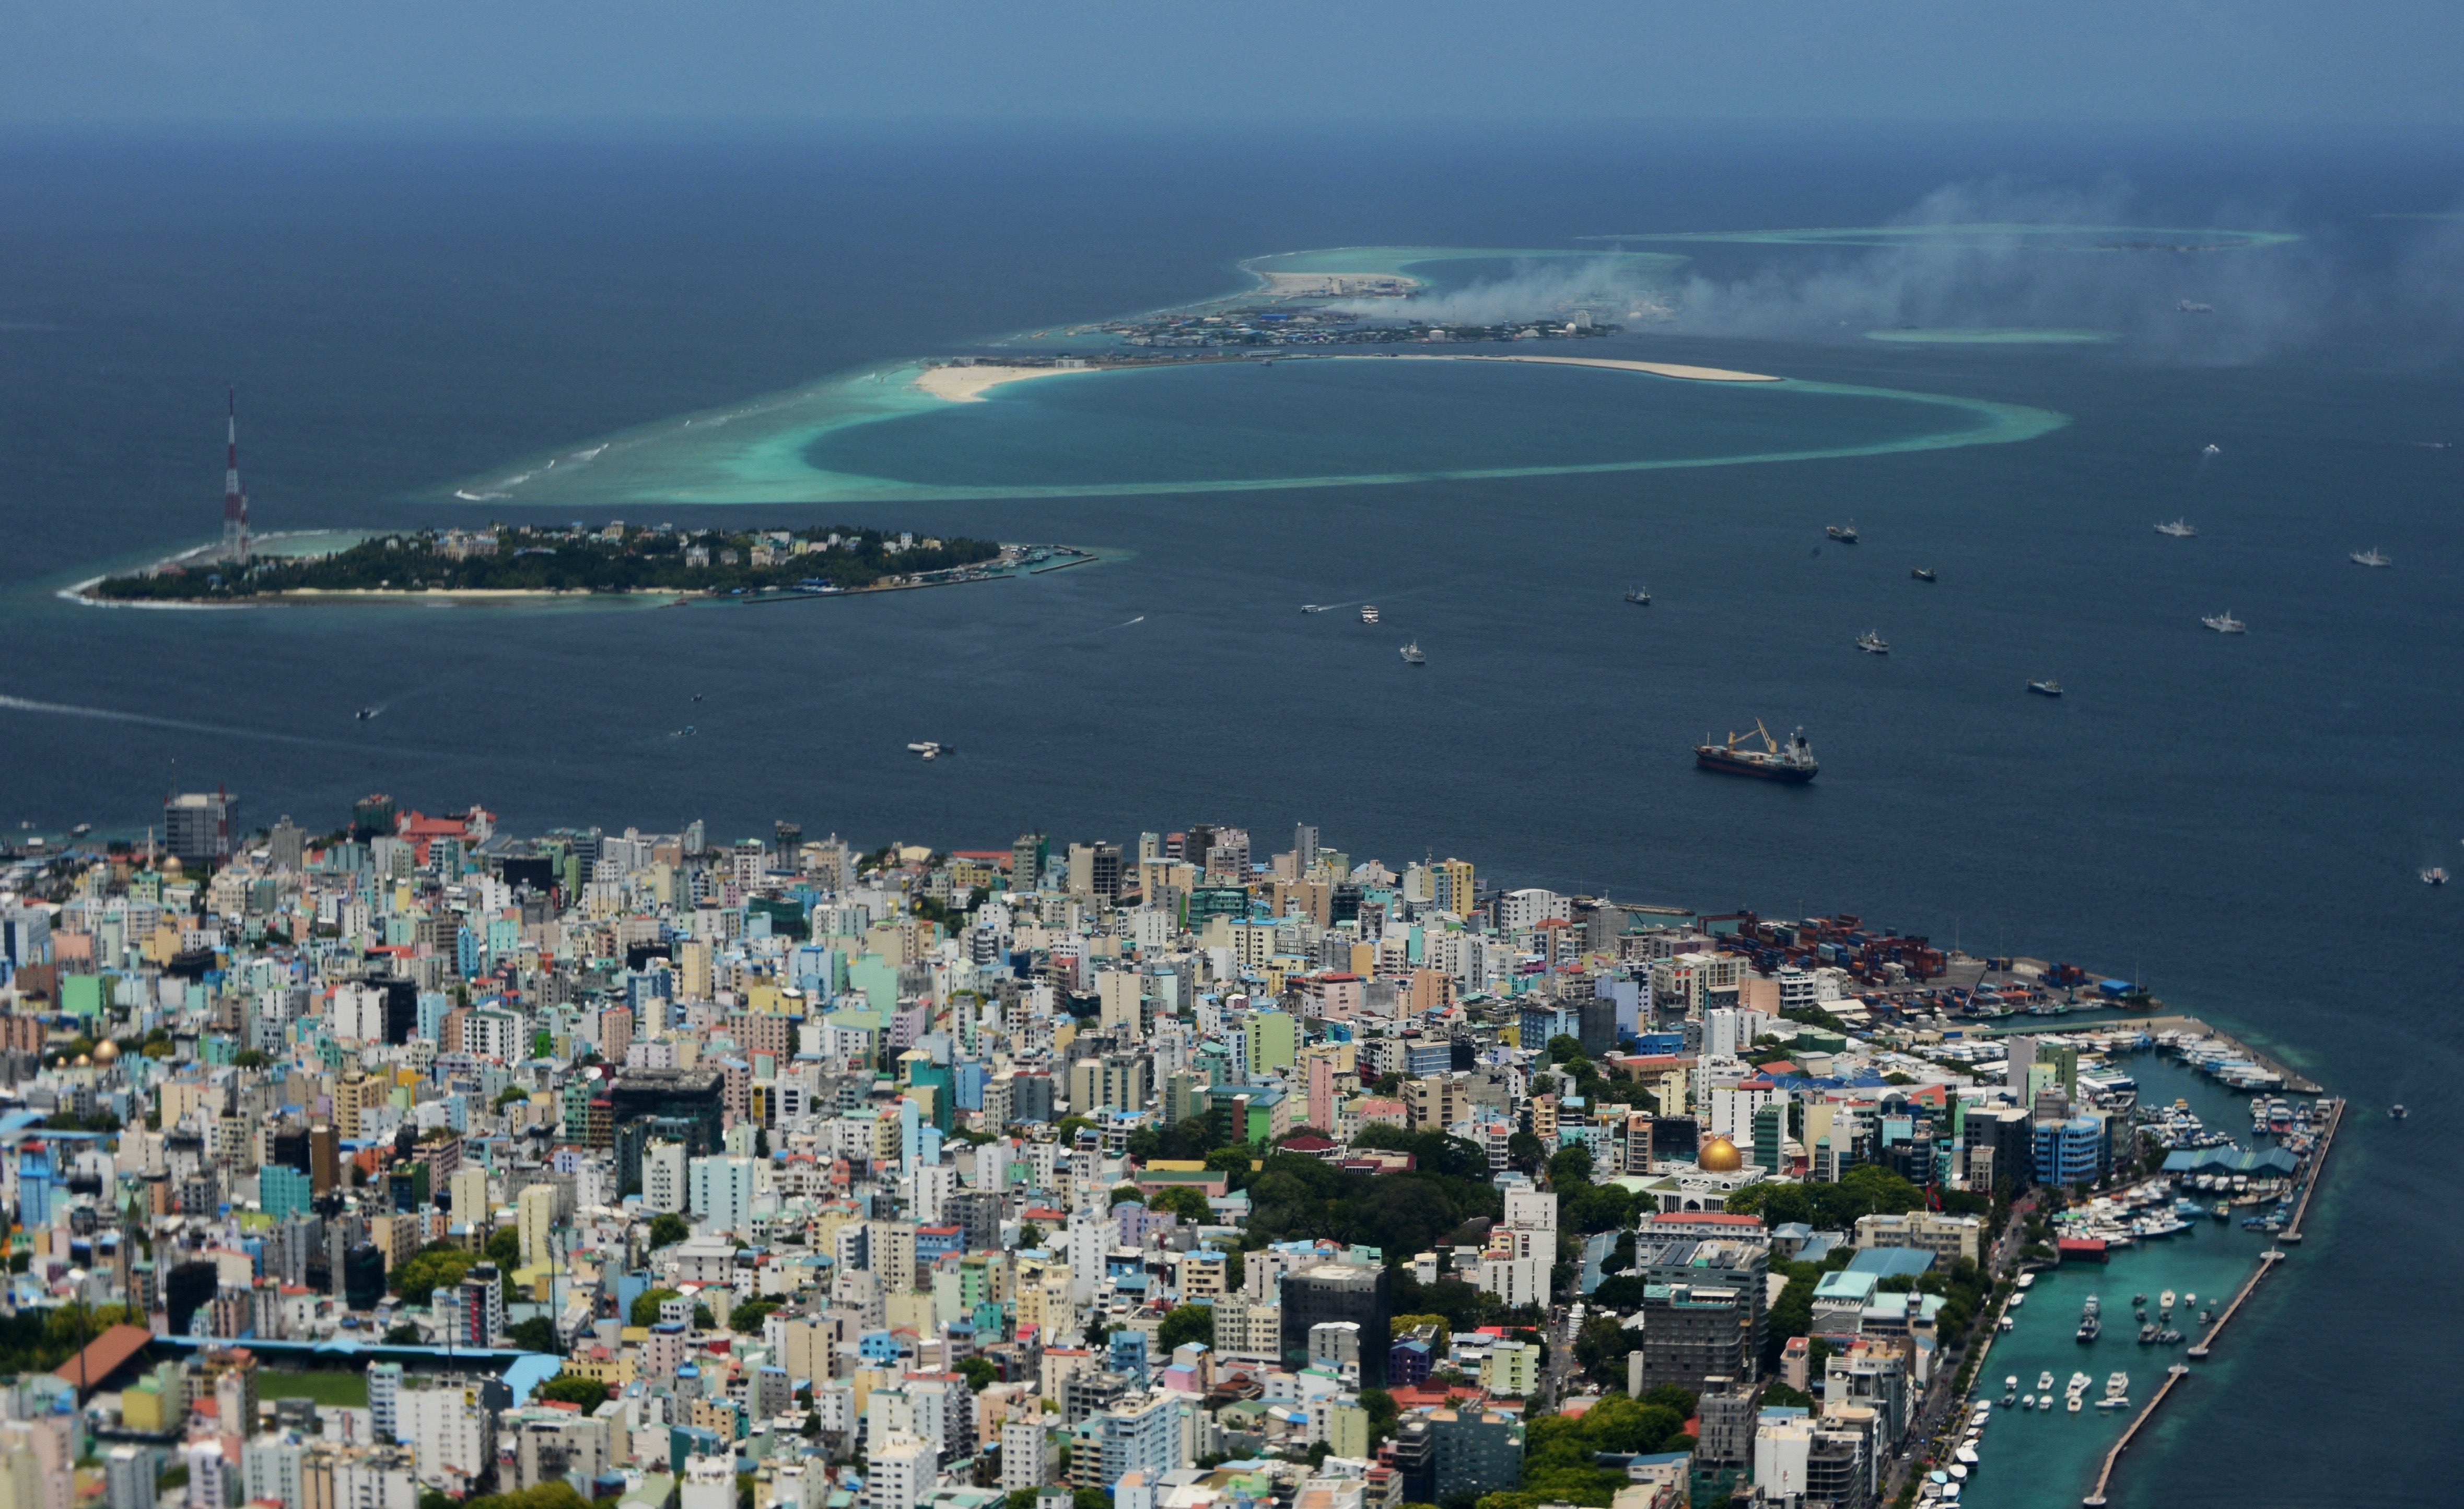 In this 2013 photo, smoke from Thilafushi can be seen near the capital city of Male. (Photo: Roberto SCHMIDT / AFP, Getty Images)